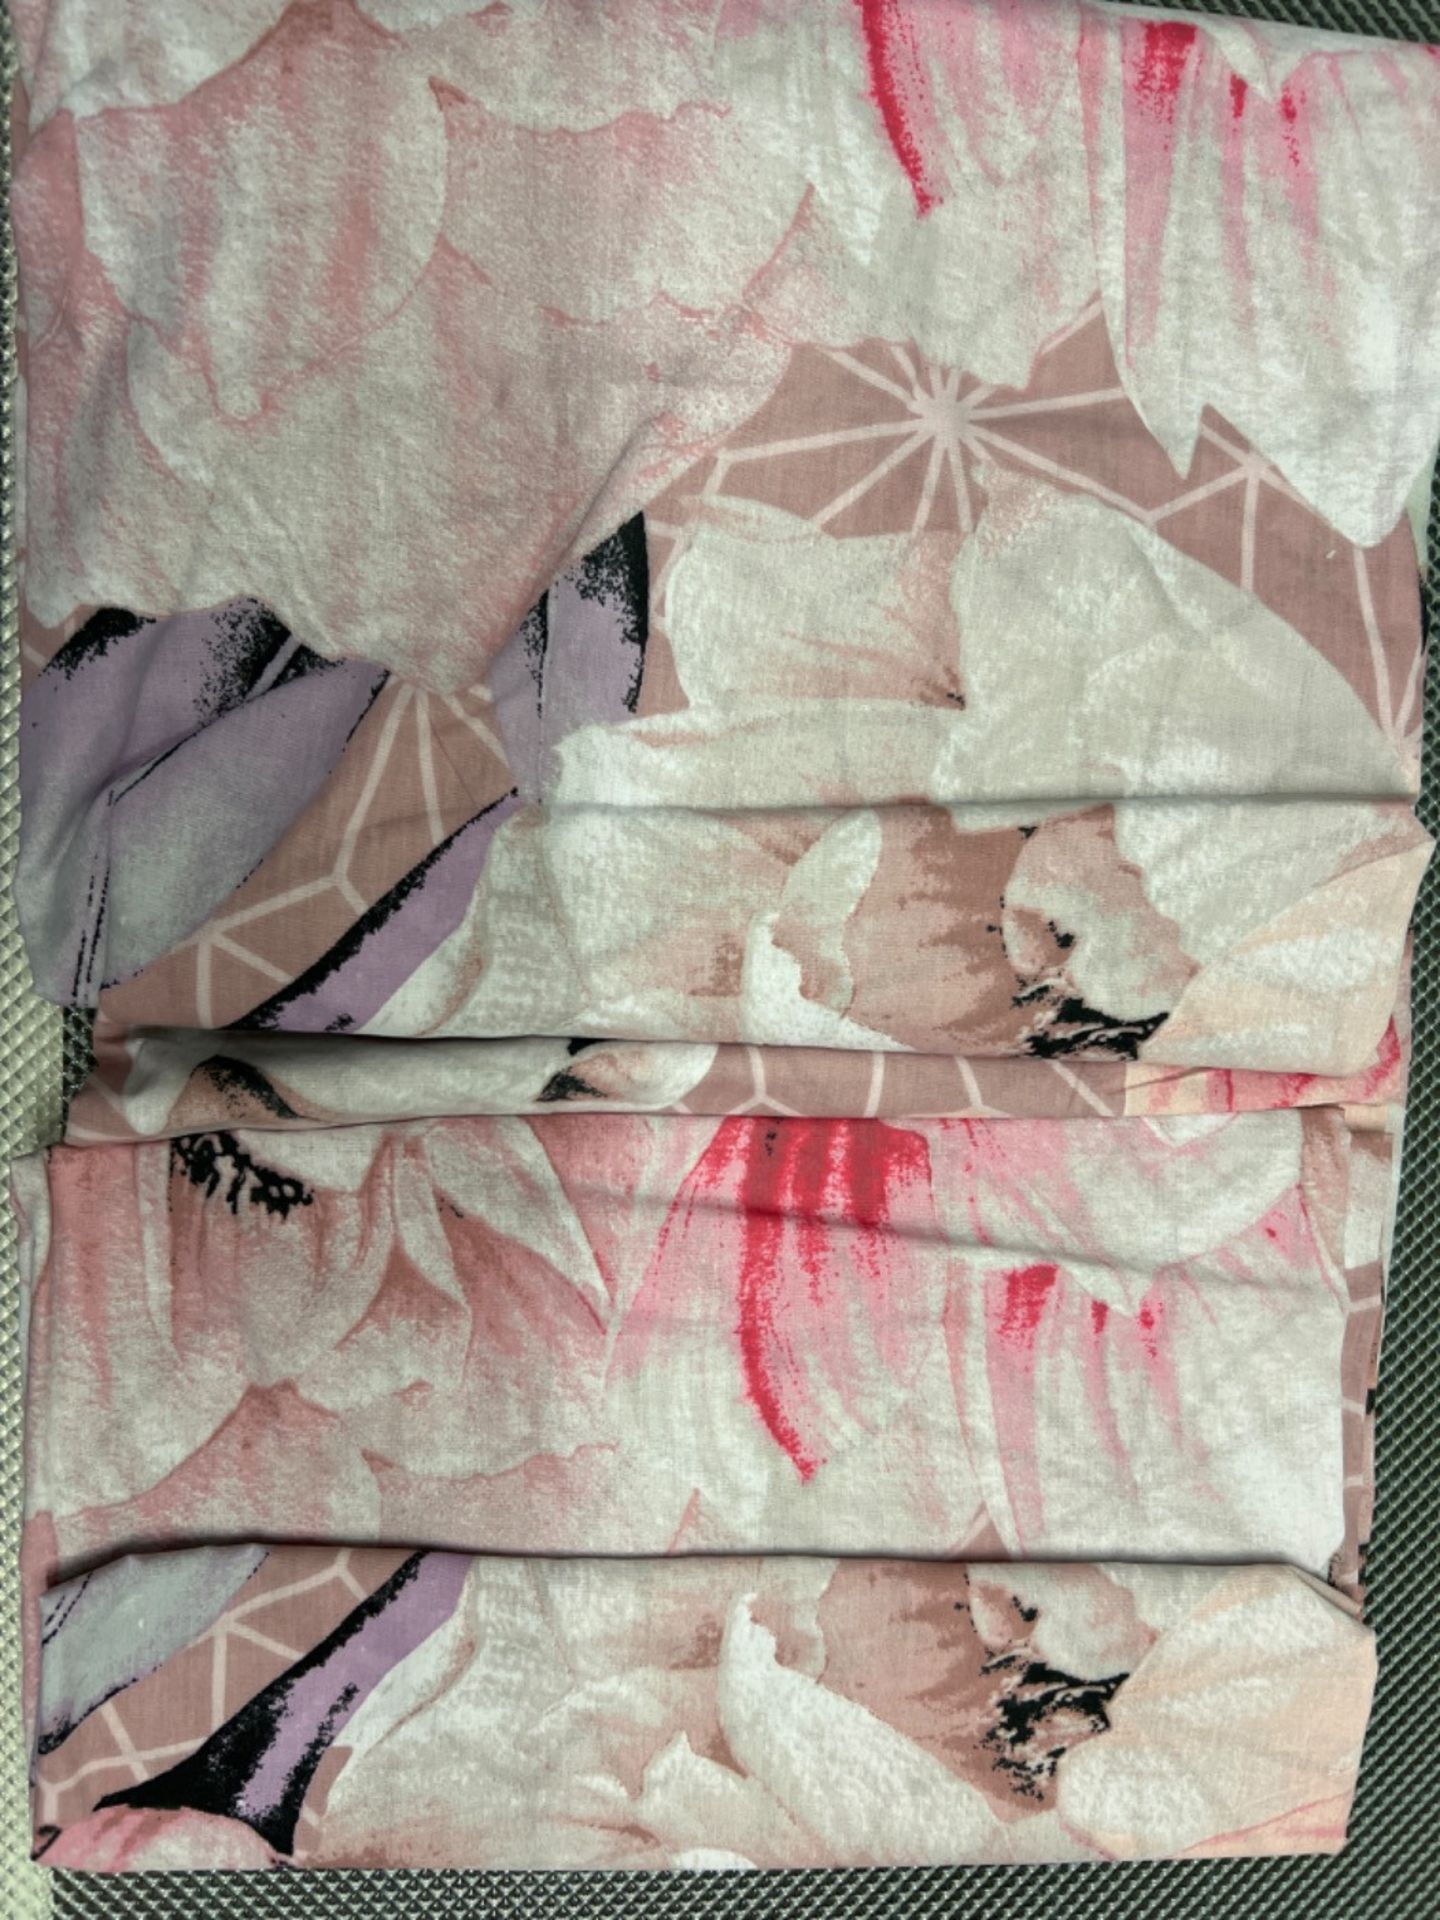 GC GAVENO CAVAILIA Large Floral Patterned Duvet Cover Watercolour Blush Pink, Easy Care Poly Cotton - Image 3 of 3